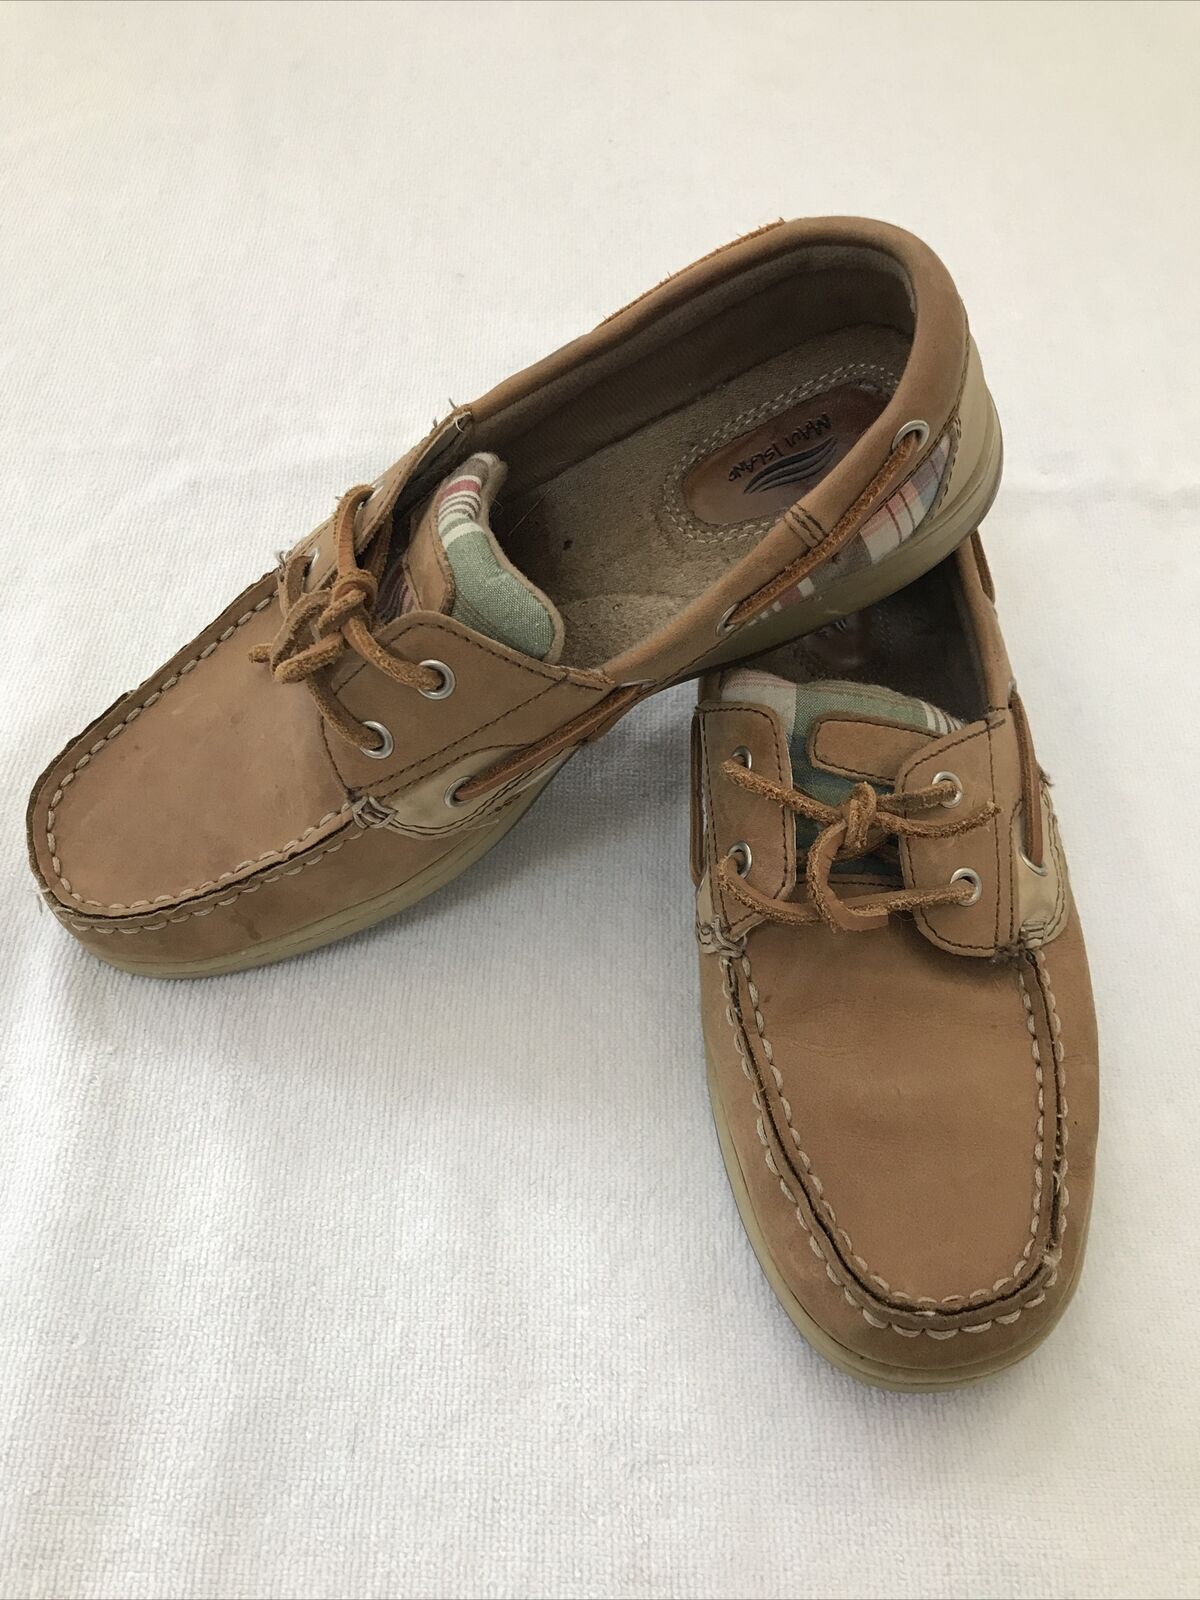 Women’s Maui Island Taupe Color Slip On Loafers Size 8 Medium ...